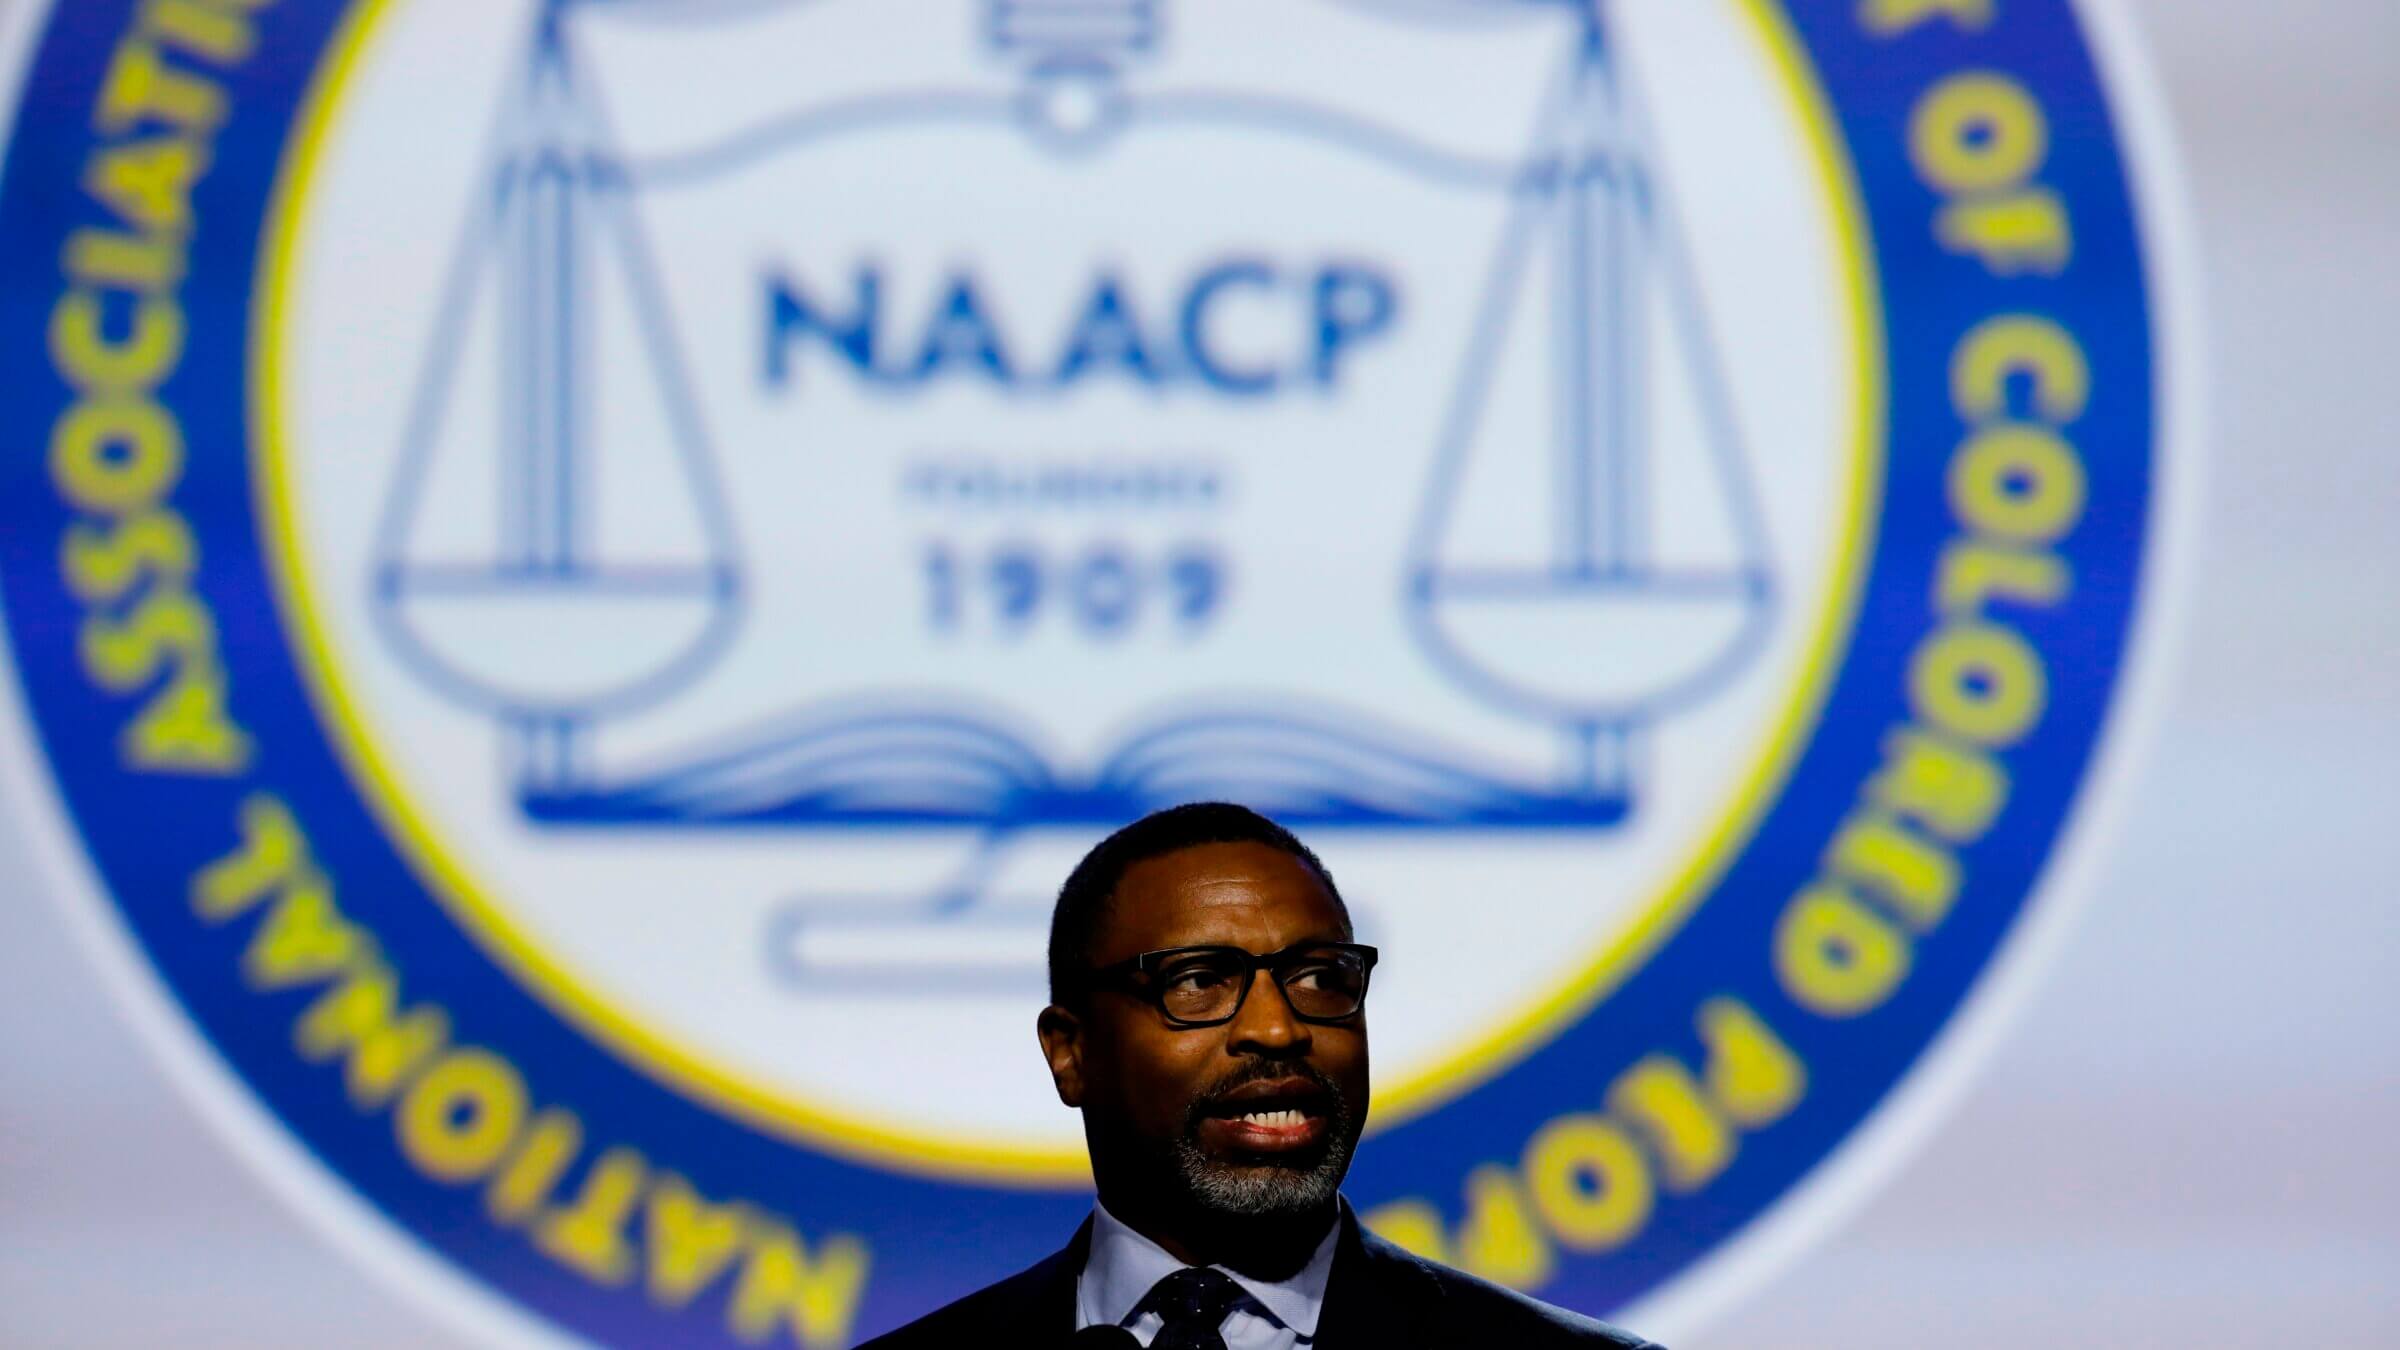 Derrick Johnson, president the NAACP, issued a statement calling for a ceasefire in Gaza and for the Biden administration to end weapon transfers to Israel Thursday before the organization removed it hours later.